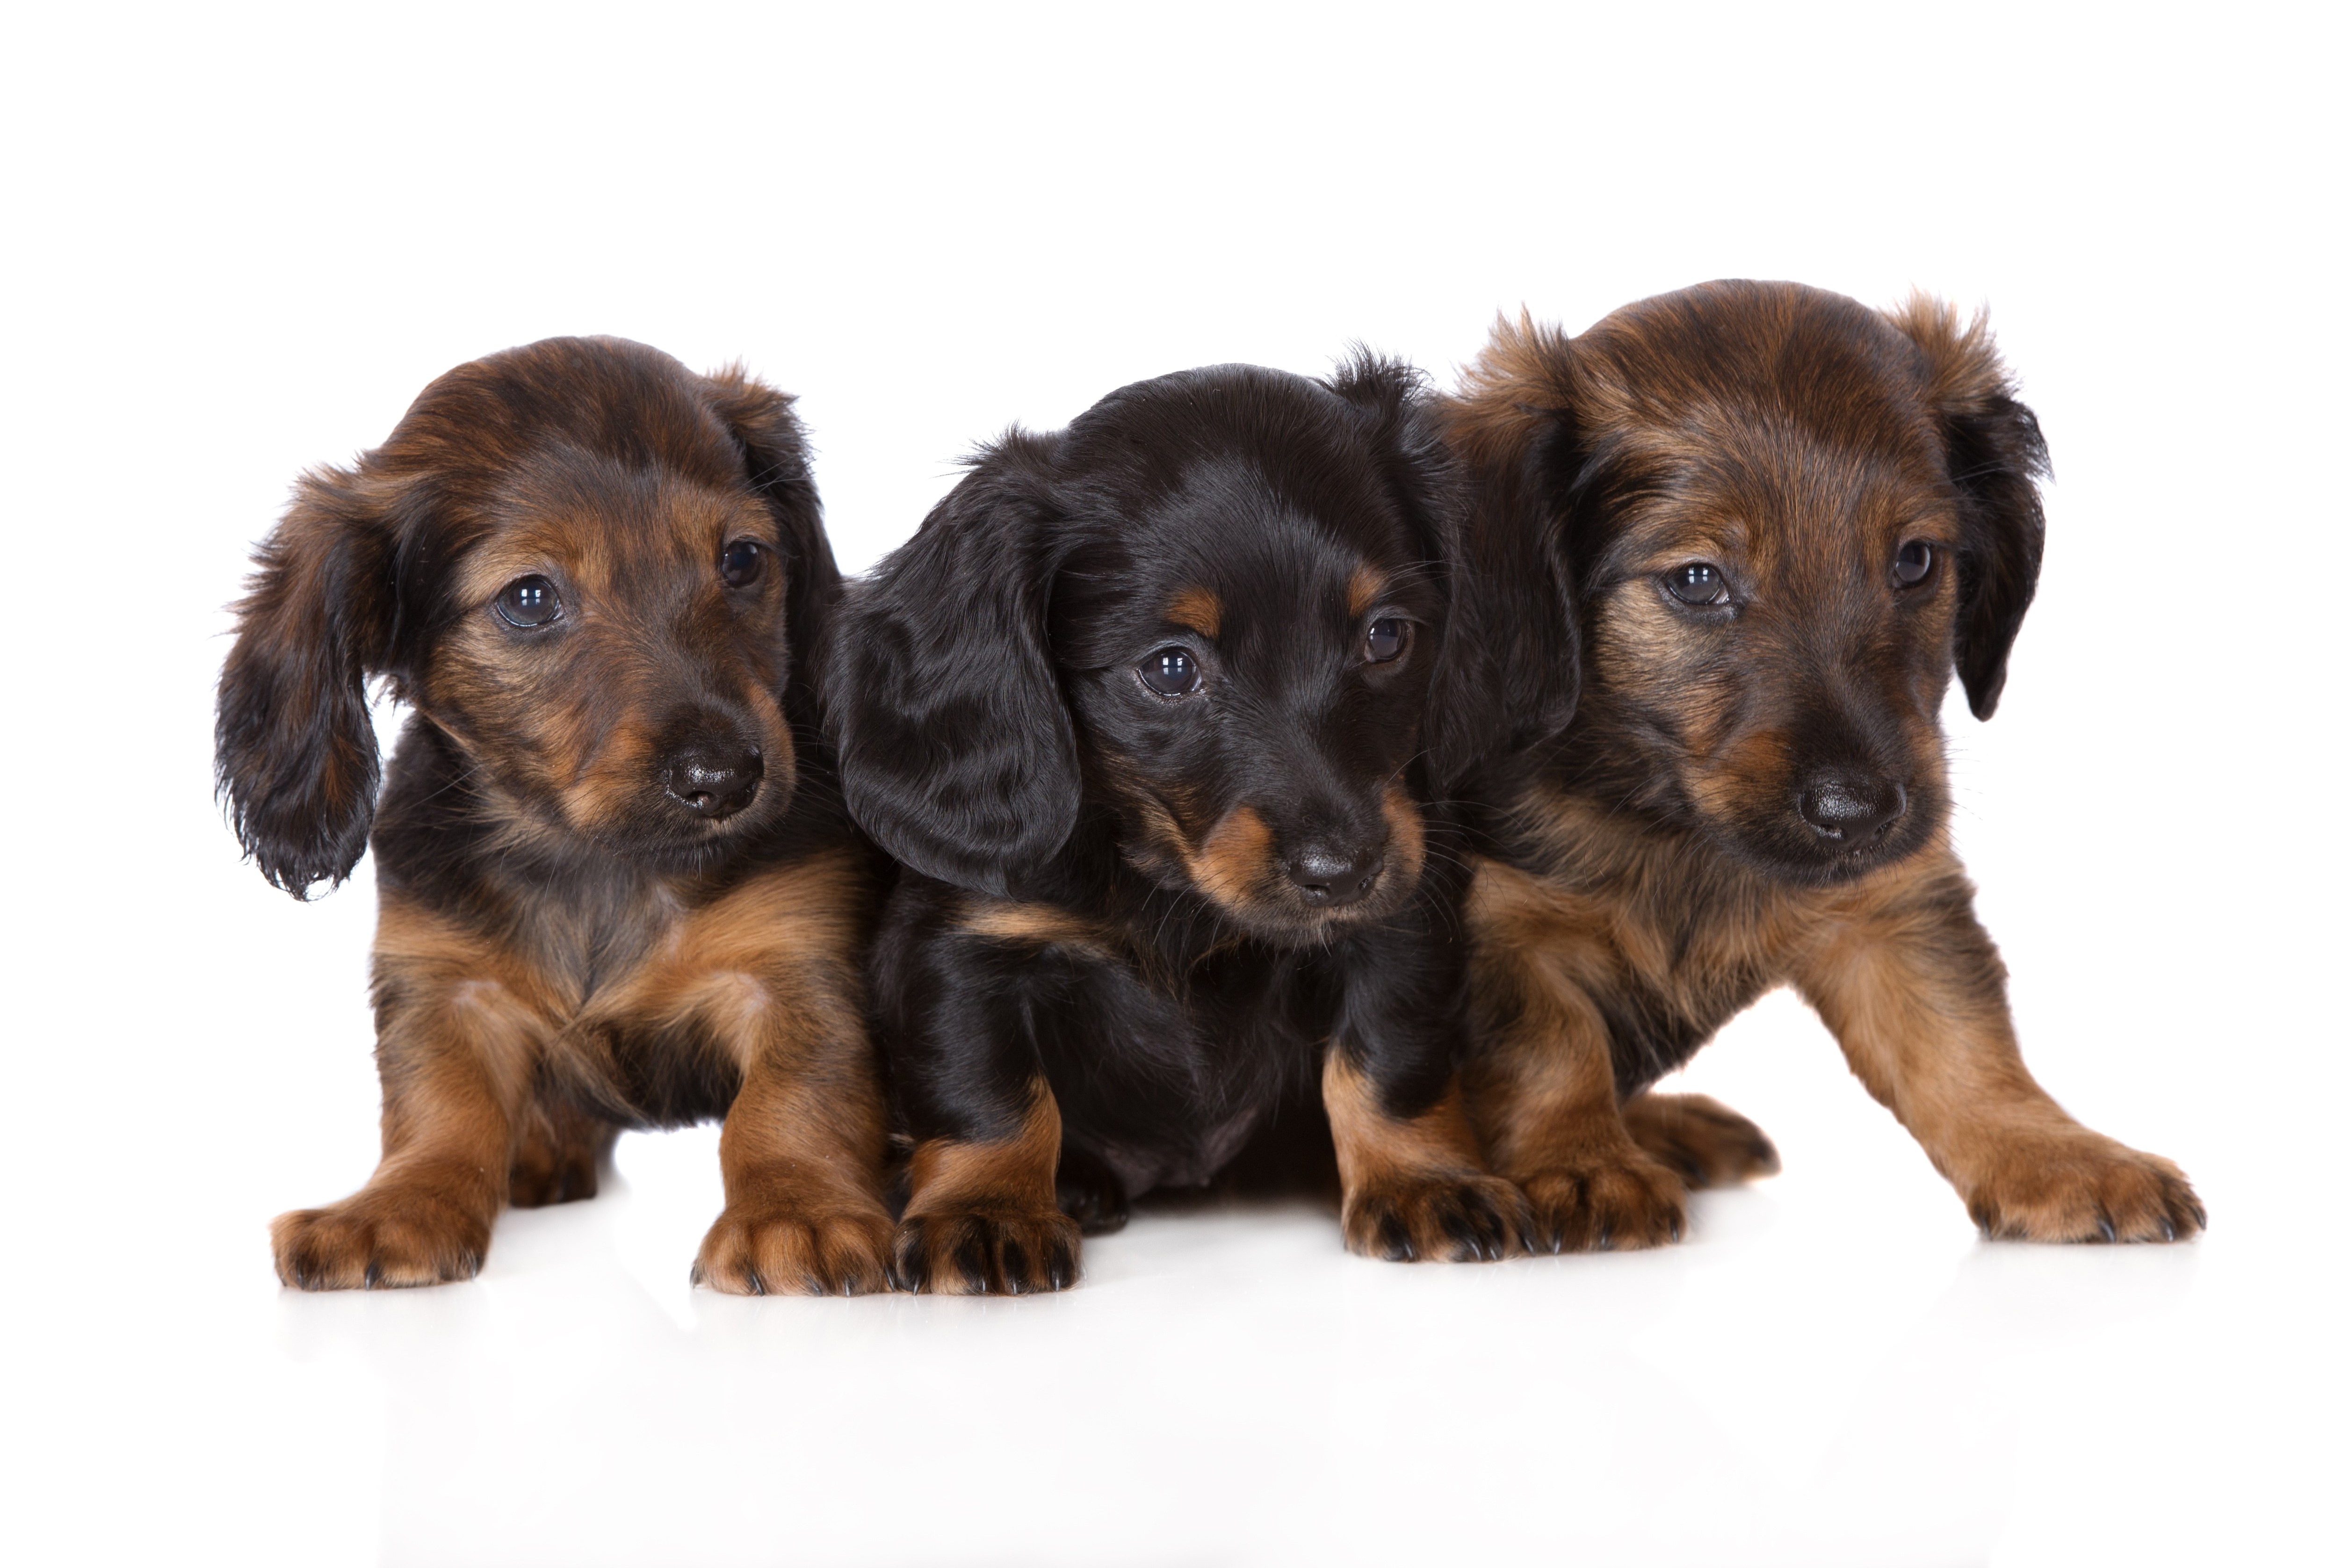 Wallpapers puppies dachshunds sweet on the desktop